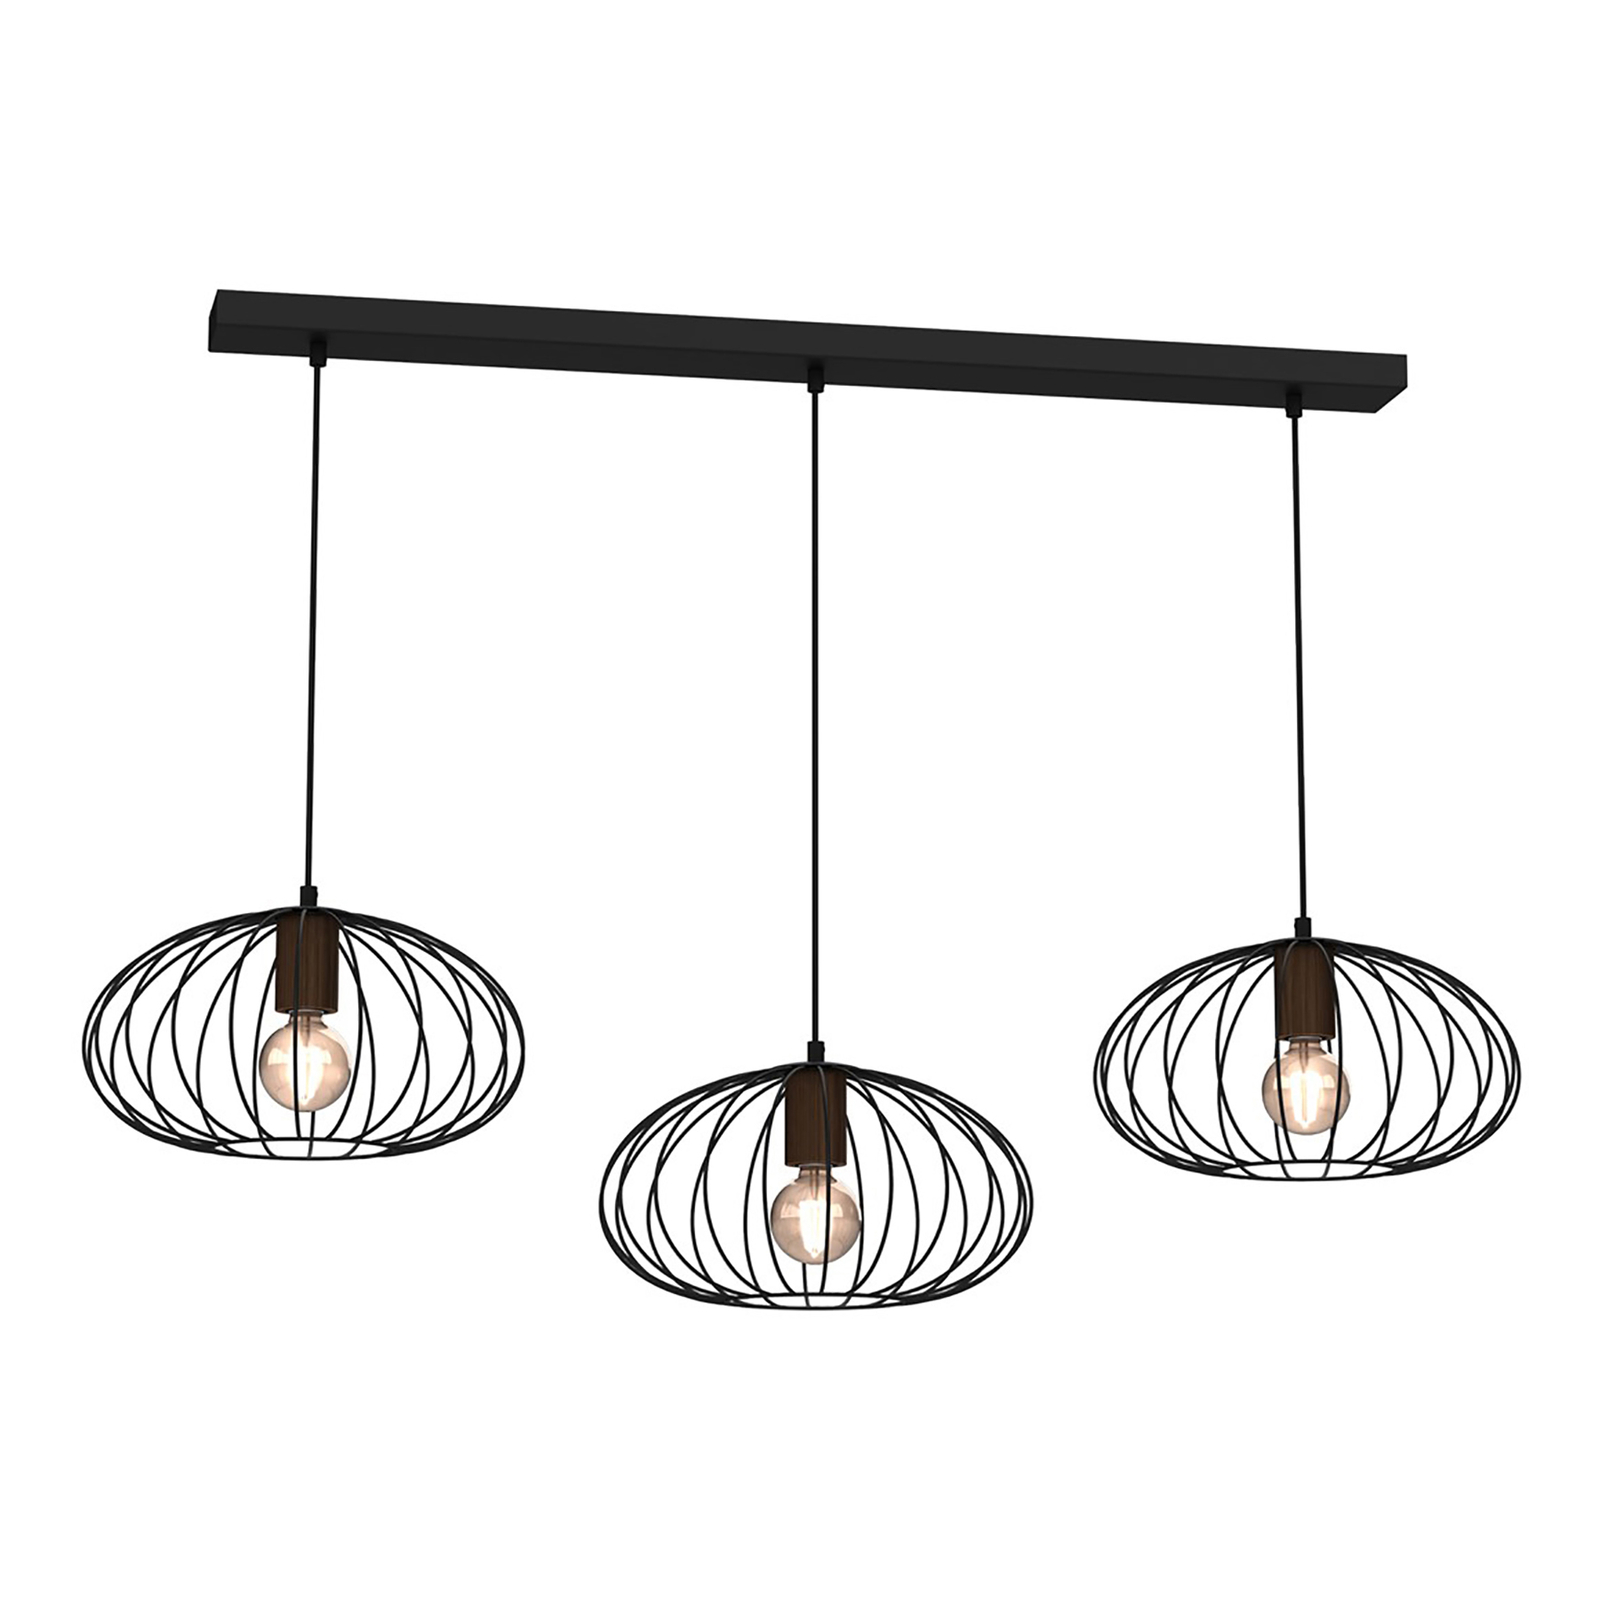 Meridiano linear pendant cage lampshade three-bulb